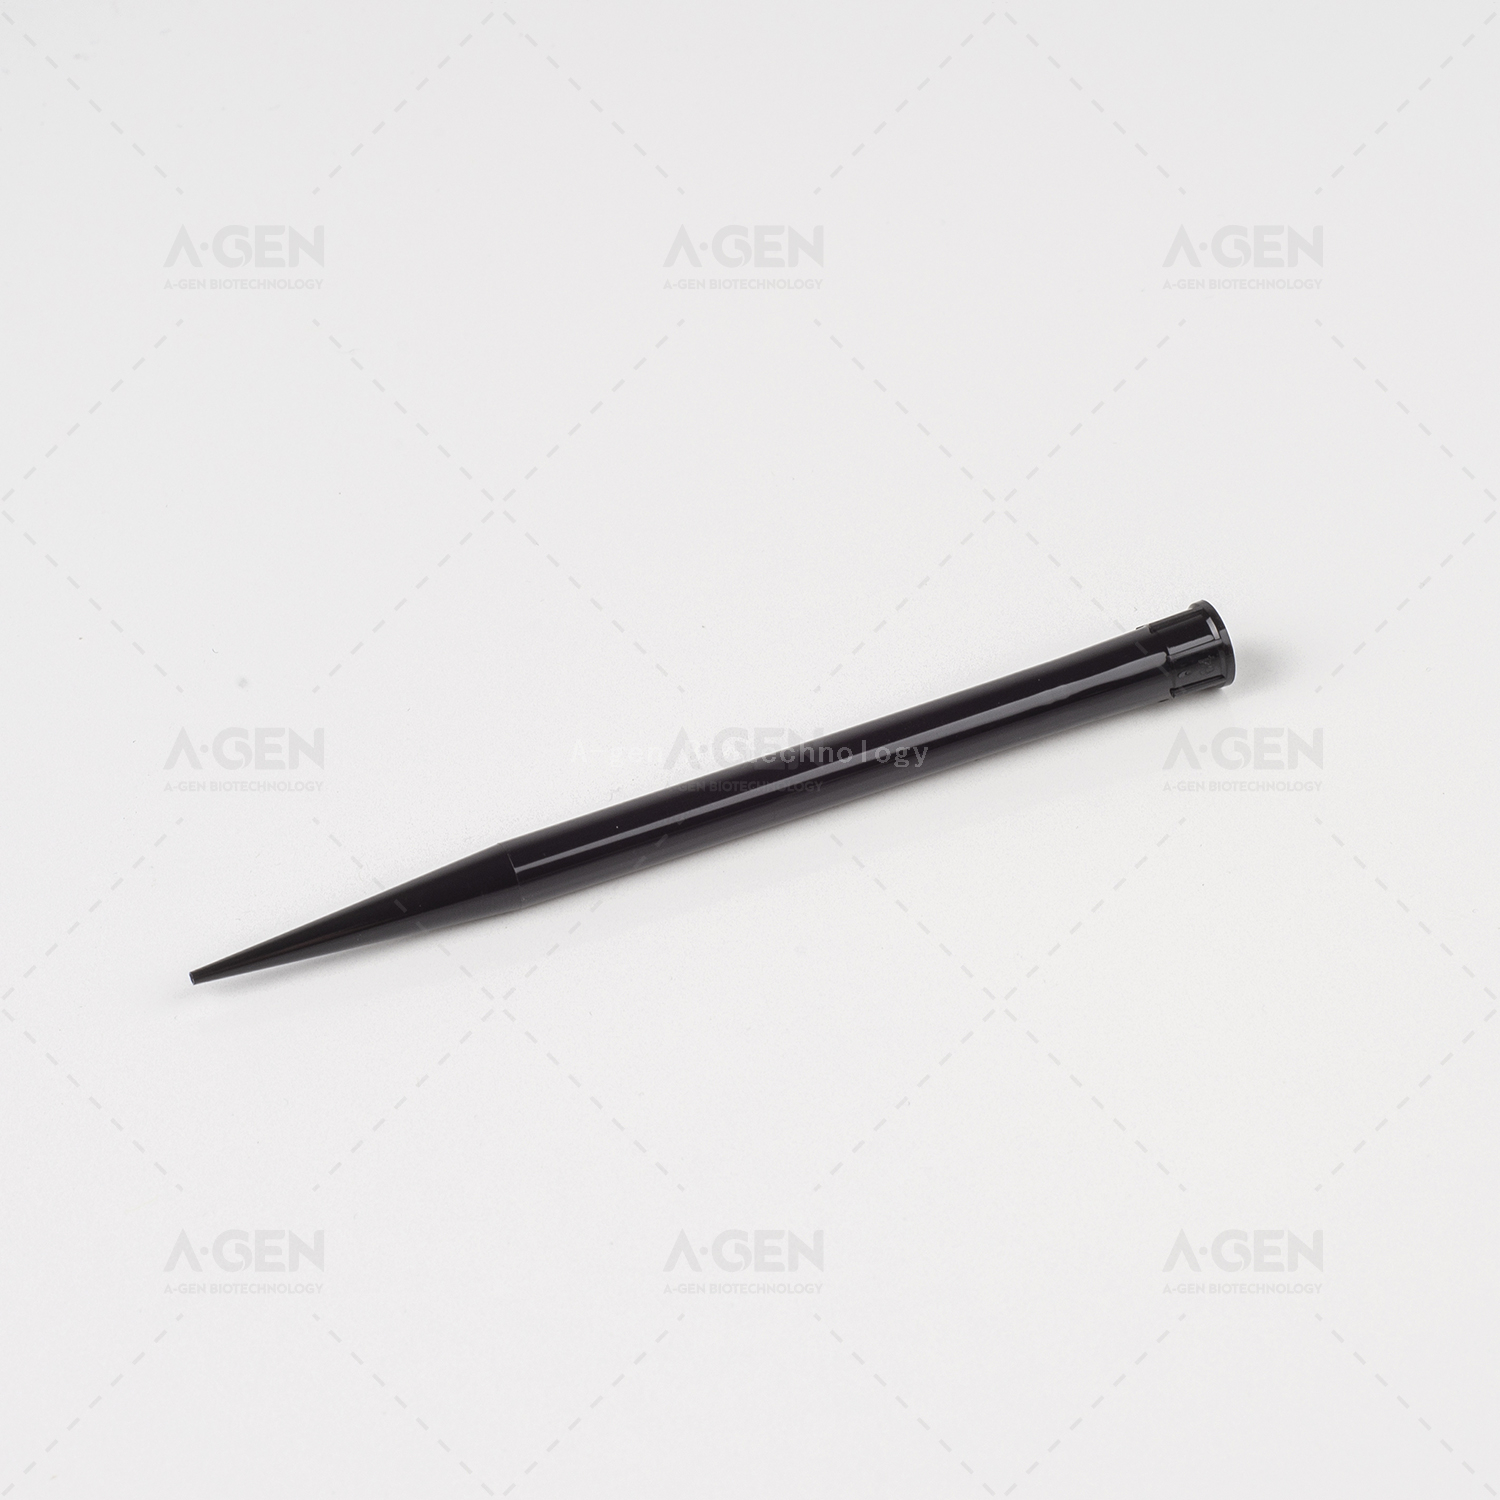 Tecan LiHa Conductive 1000μL Black PP Pipette Tip (Racked,sterilized) for Liquid Transfer With Filter TTF-1000C-RS